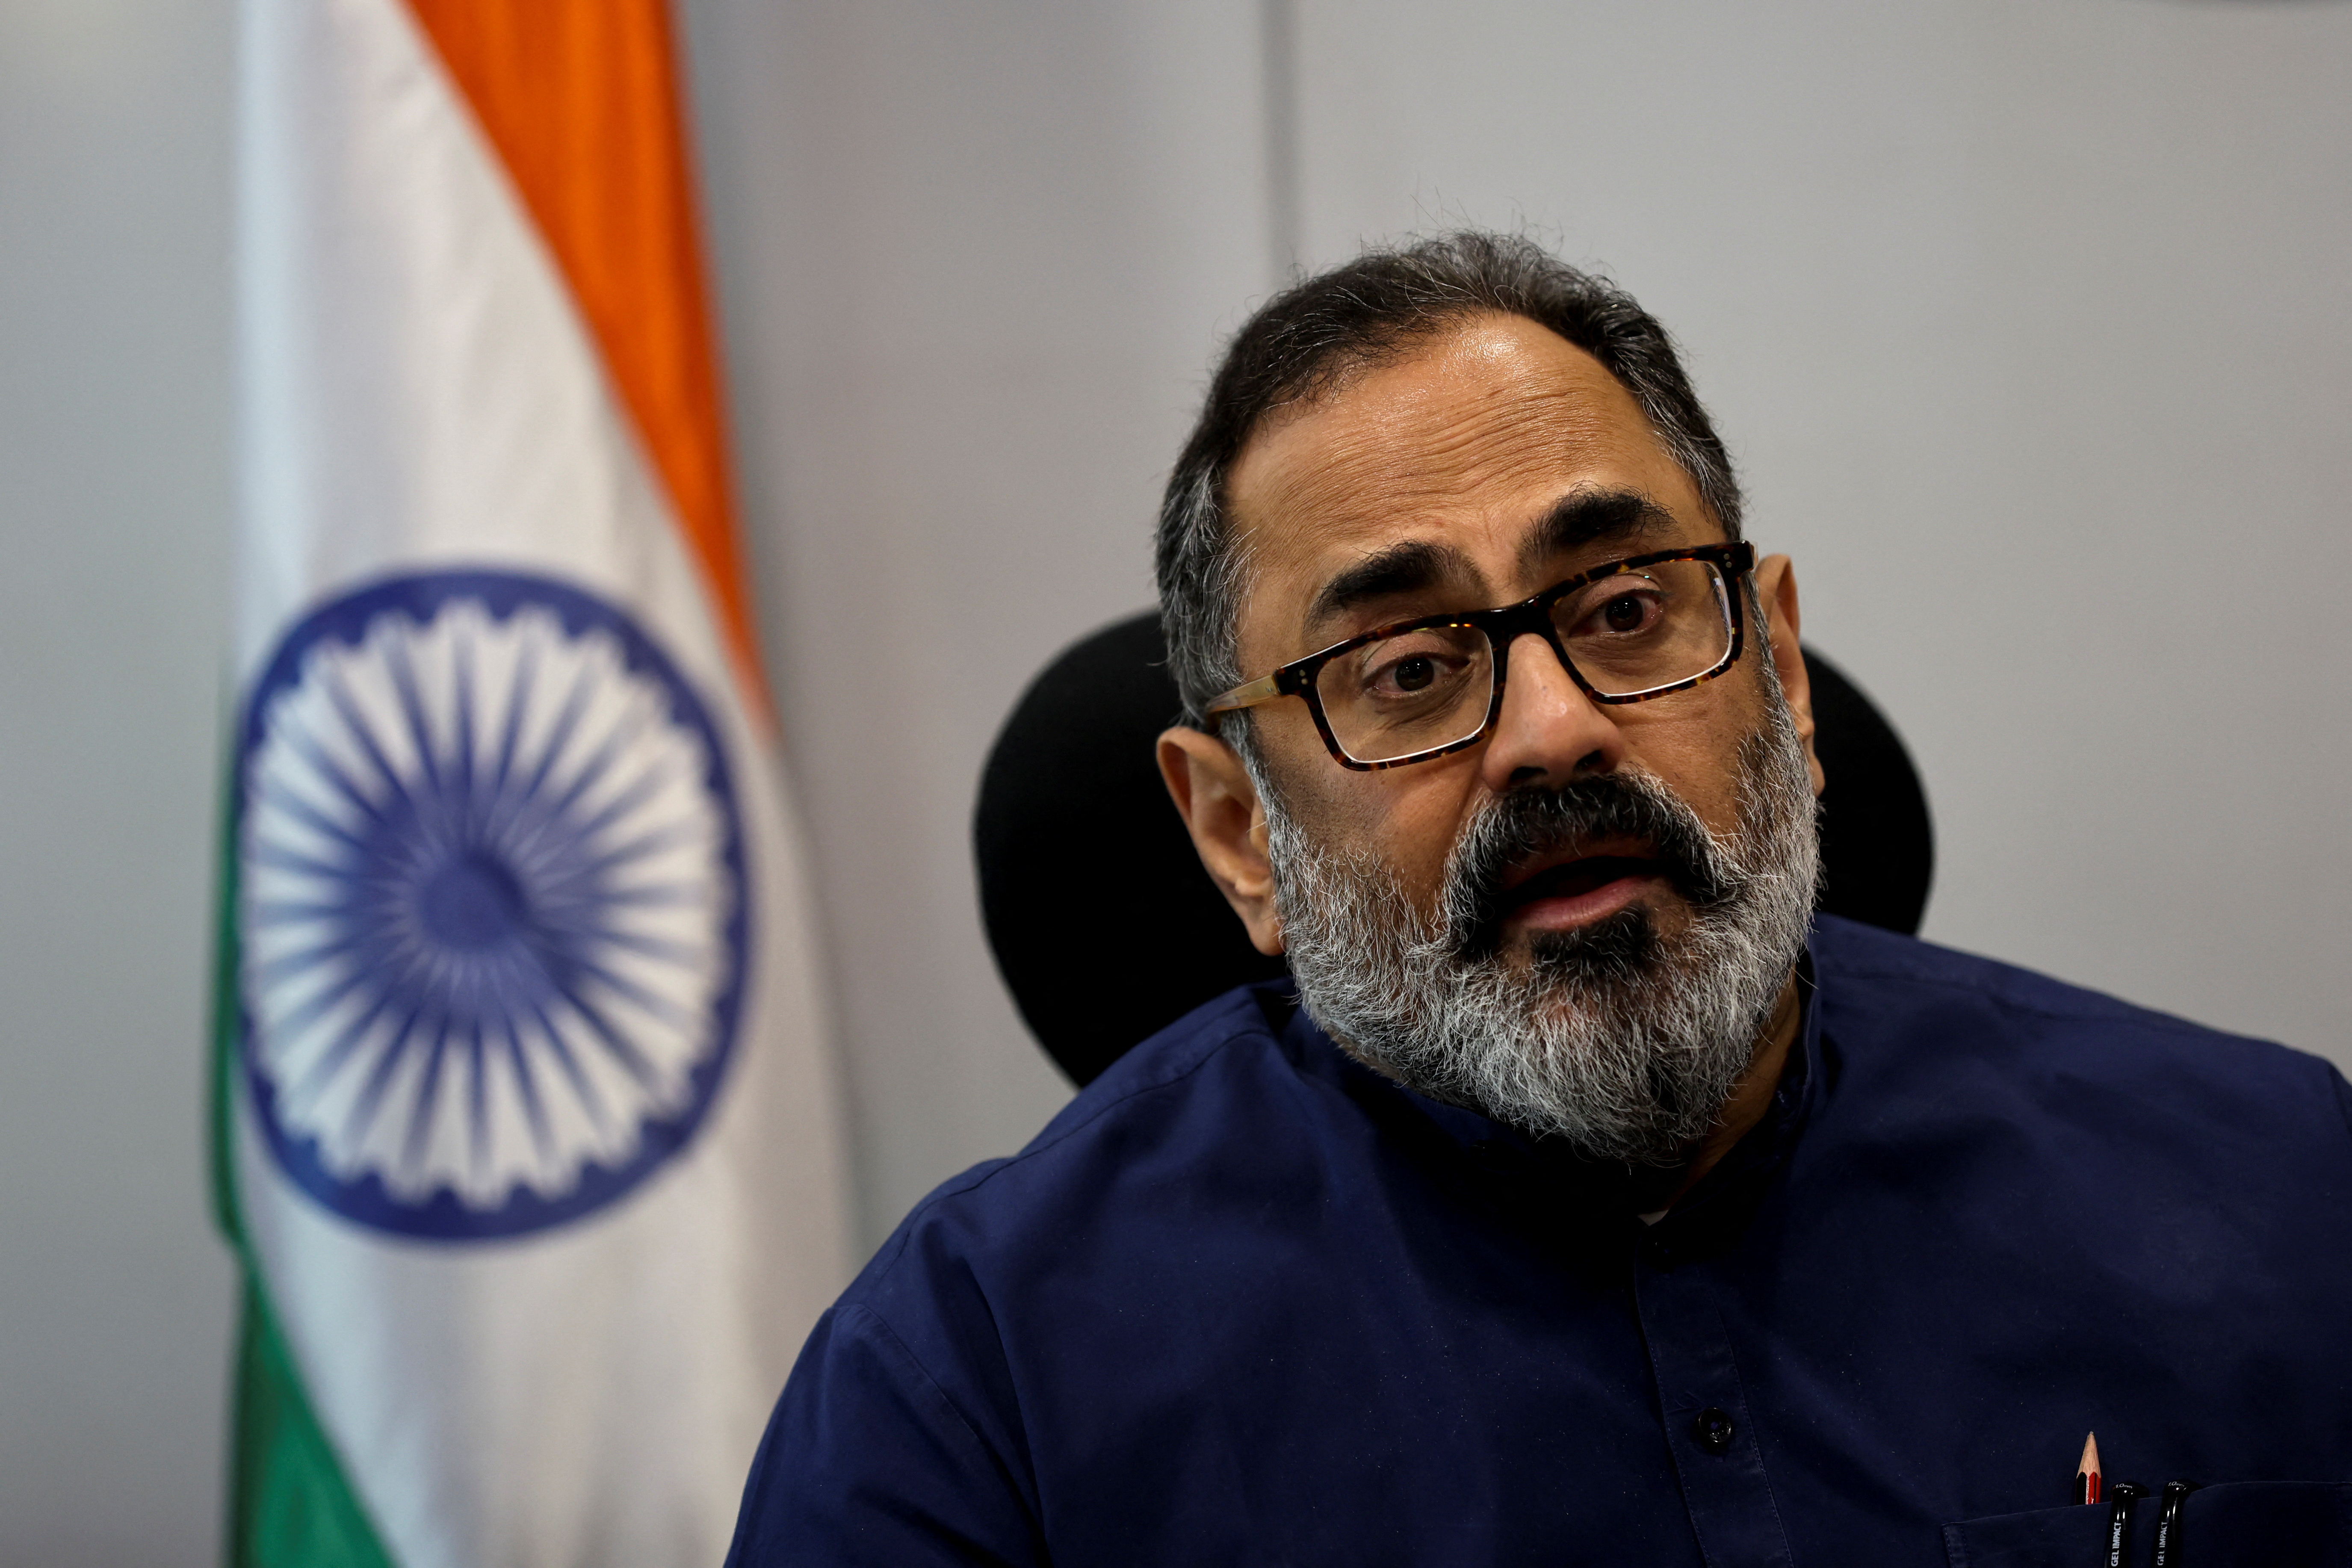 India's Deputy Minister for Information Technology Rajeev Chandrasekhar said in an interview with Reuters at his office in New Delhi.